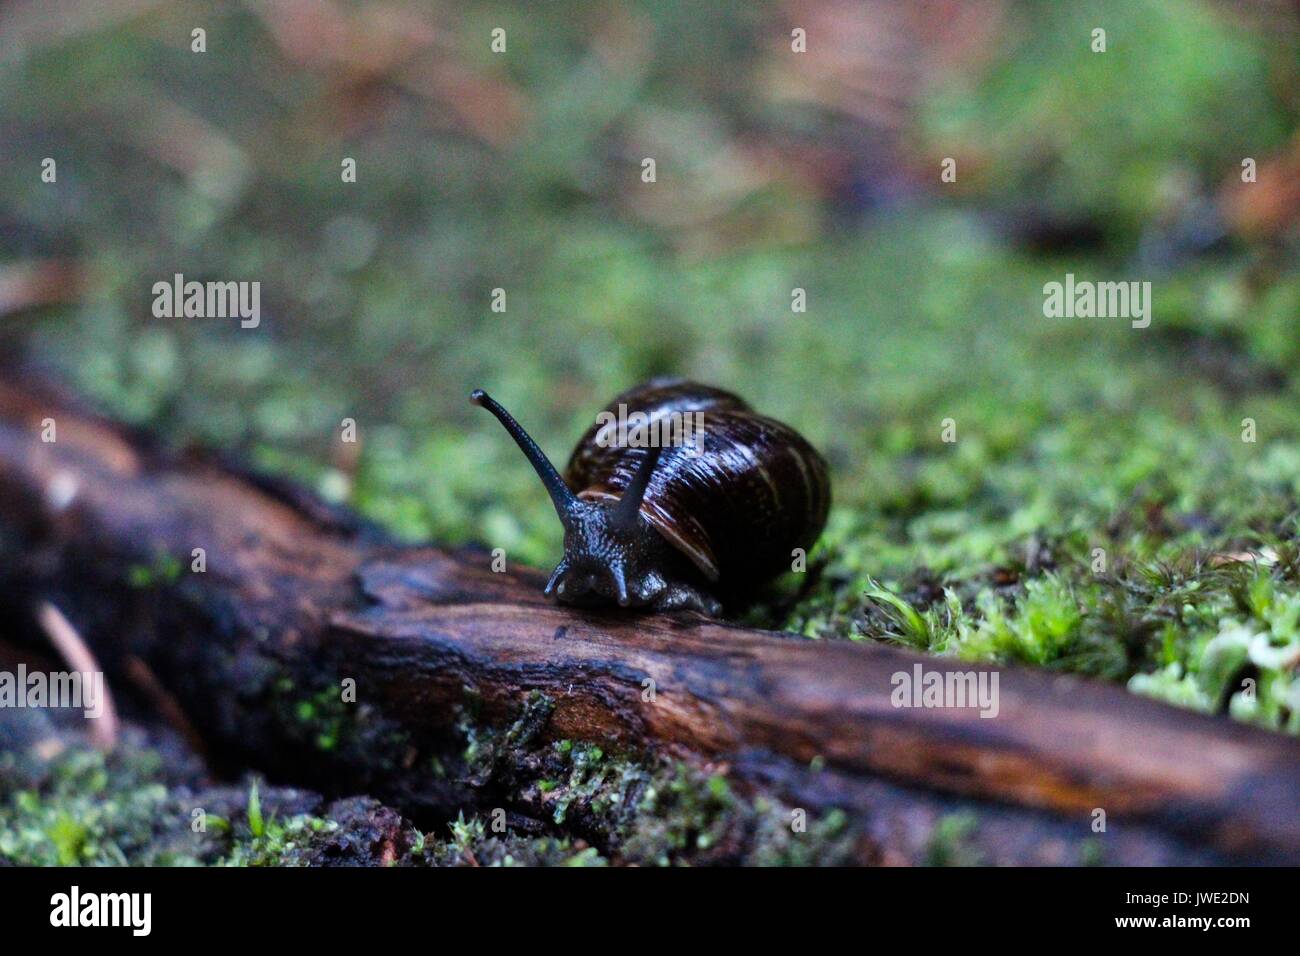 Root Movement High Resolution Stock Photography and Images - Alamy